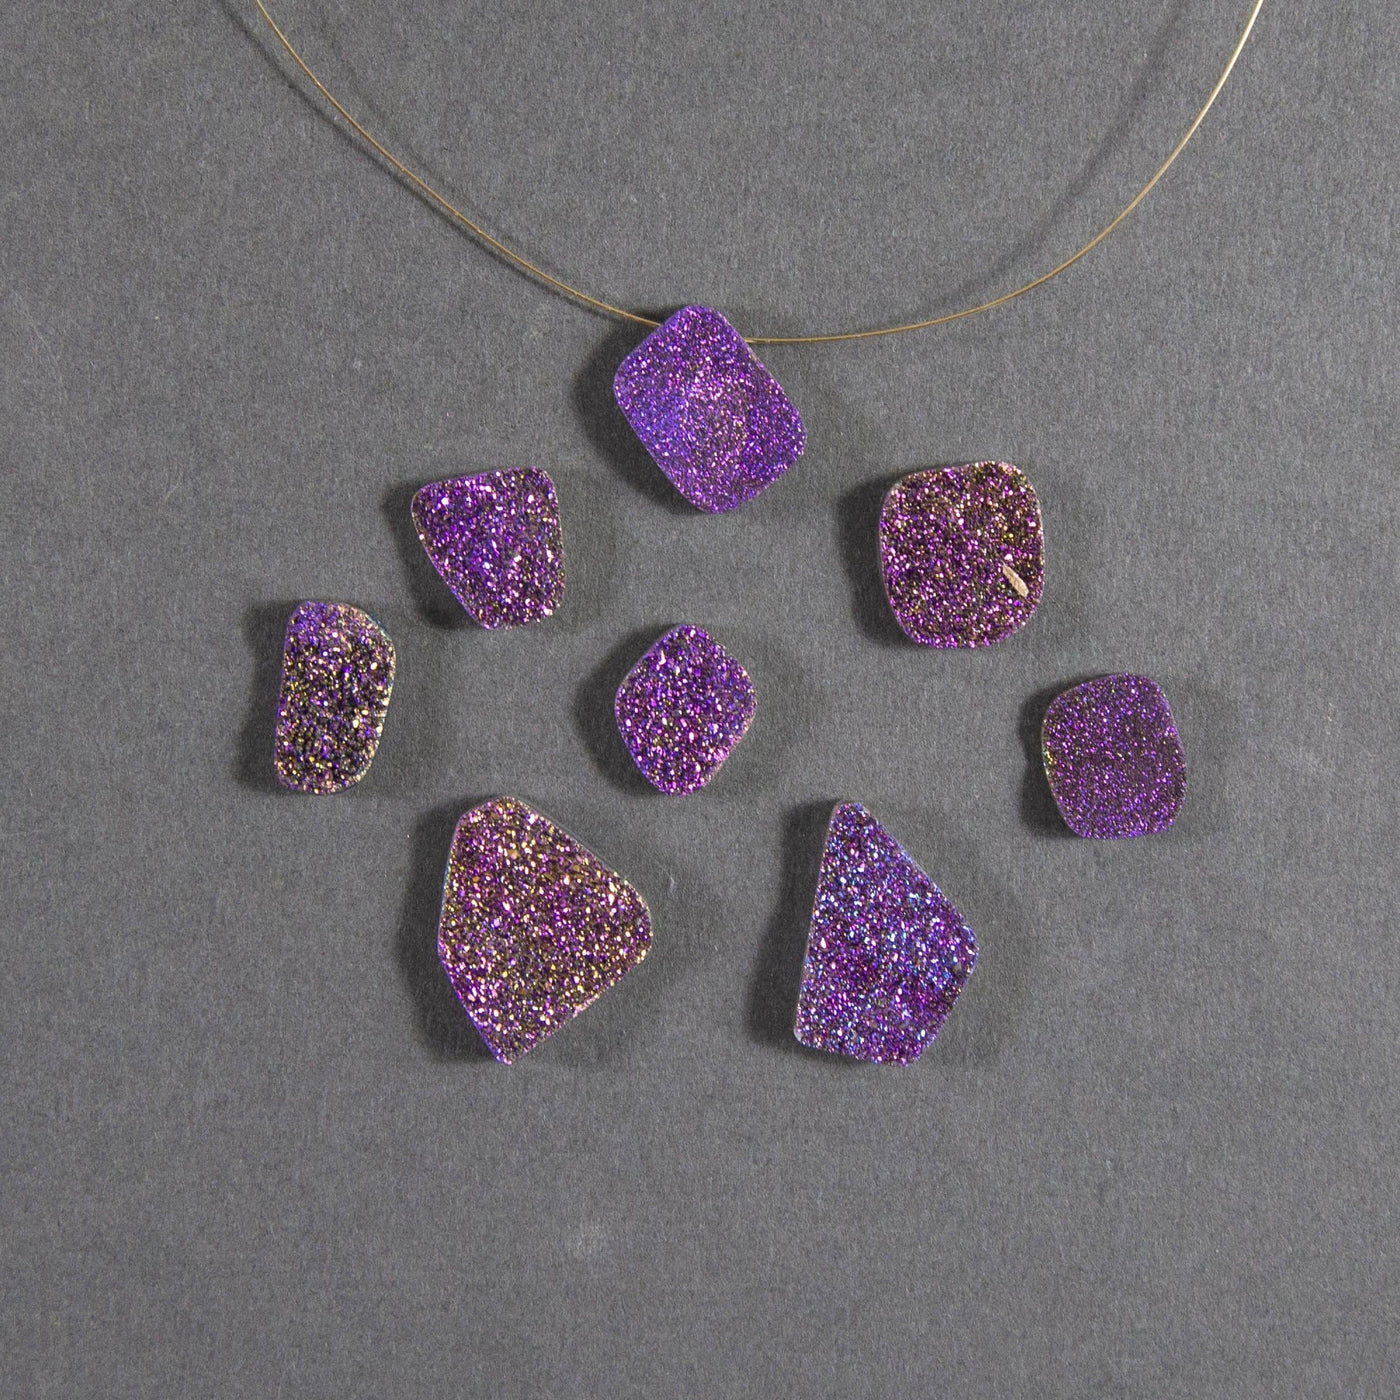 purple druzy beads displayed with a wire through hole and up close to view various colors textures shapes sizes